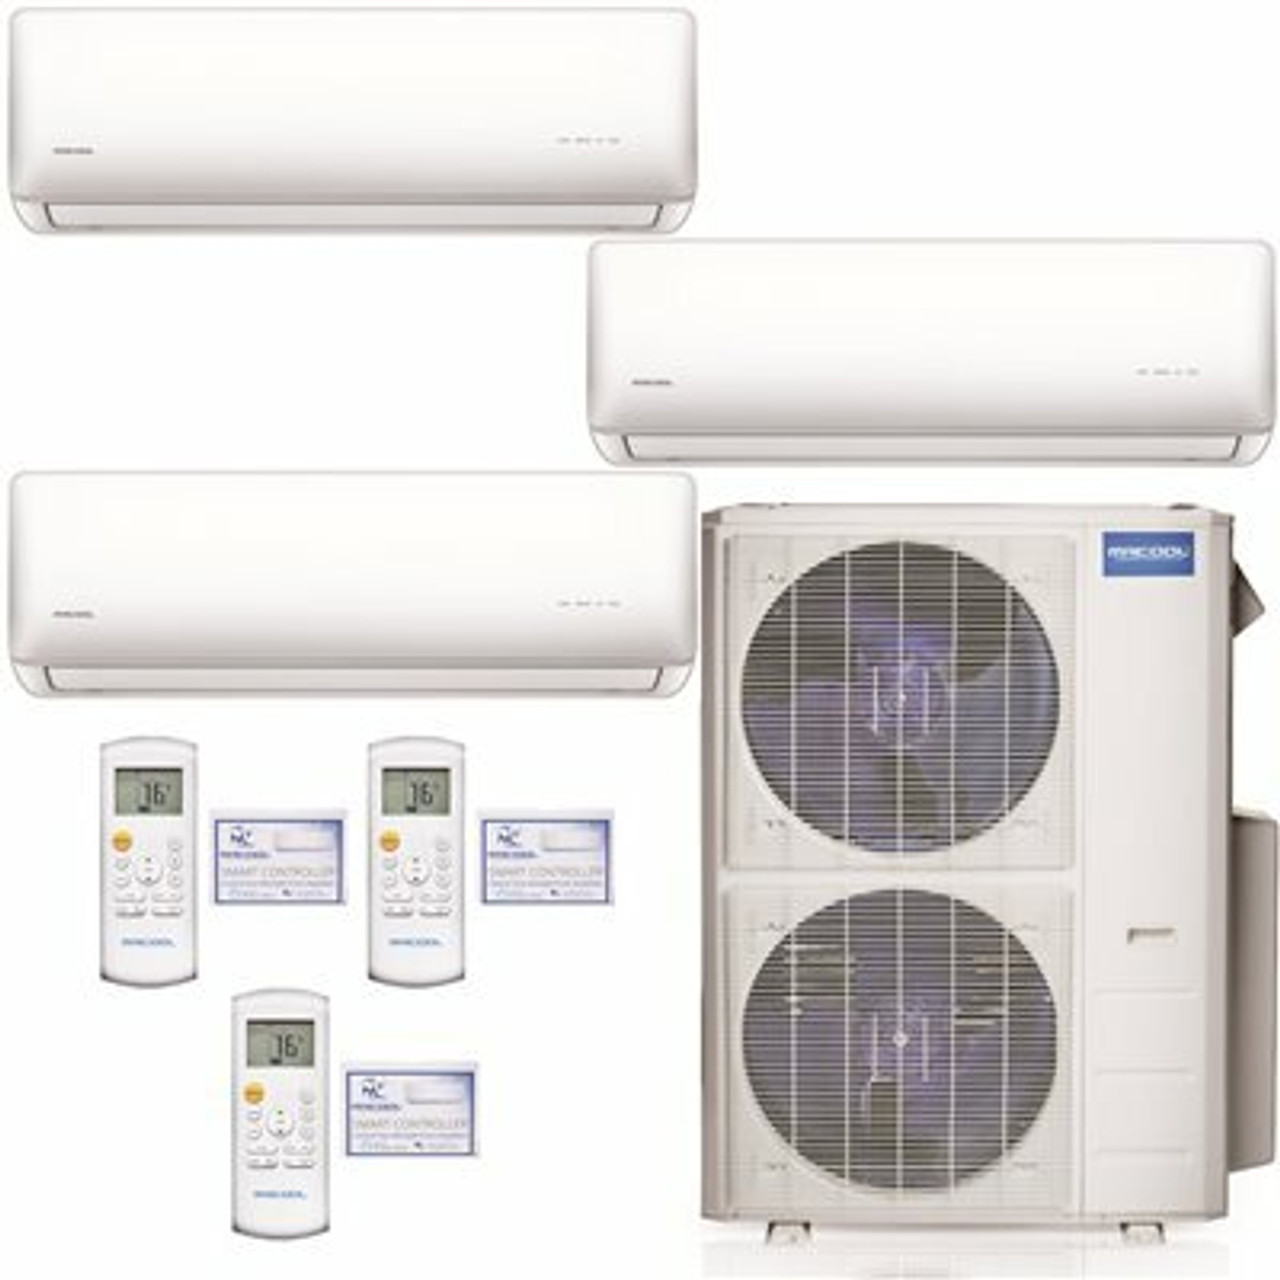 Mrcool Olympus 48,000 Btu 4 Ton 3-Zone Ductless Mini Split Air Conditioner And Heat Pump, 25 Ft. Install Kit - 230V/60Hz